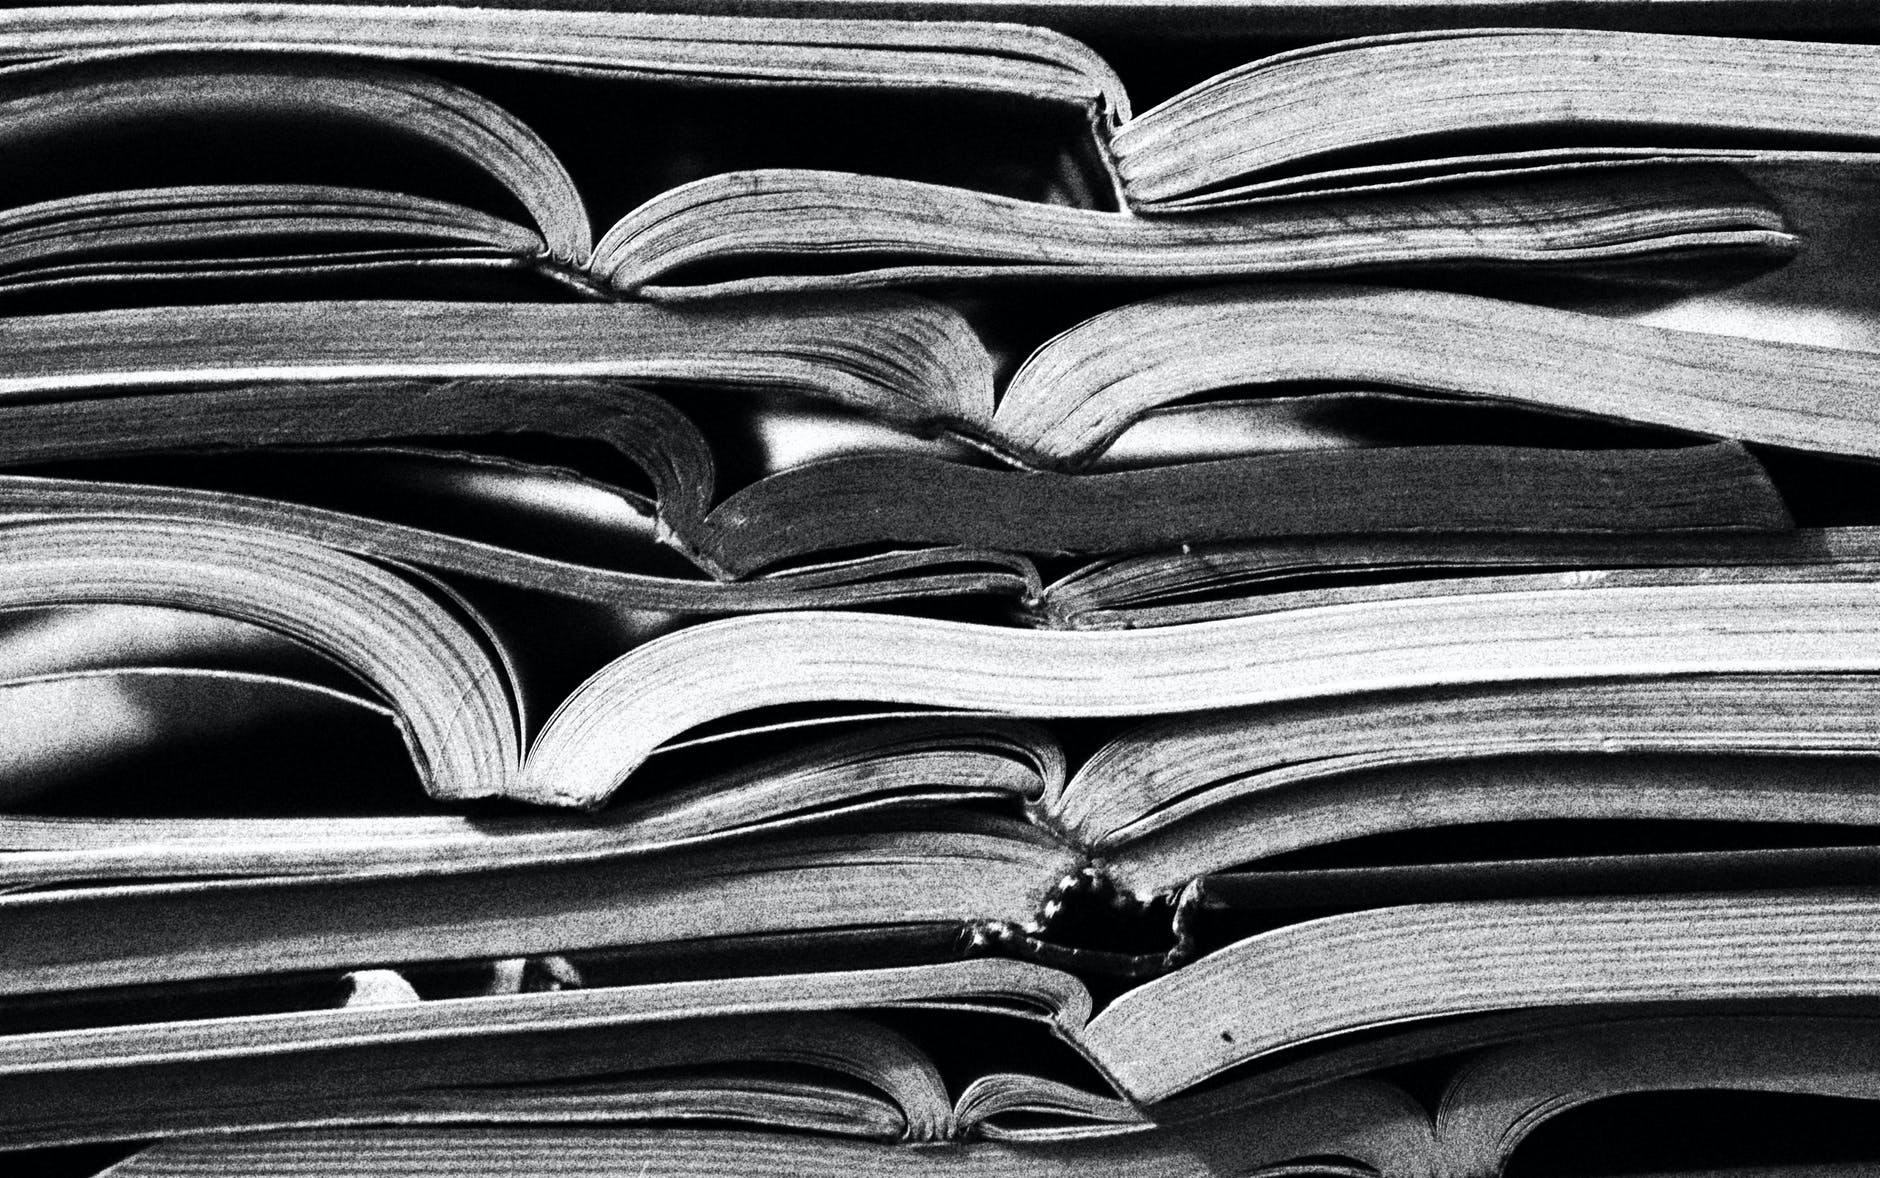 Black and white picture of opened books piled on top of one another. Photo by Ferbugs on Pexels.com.